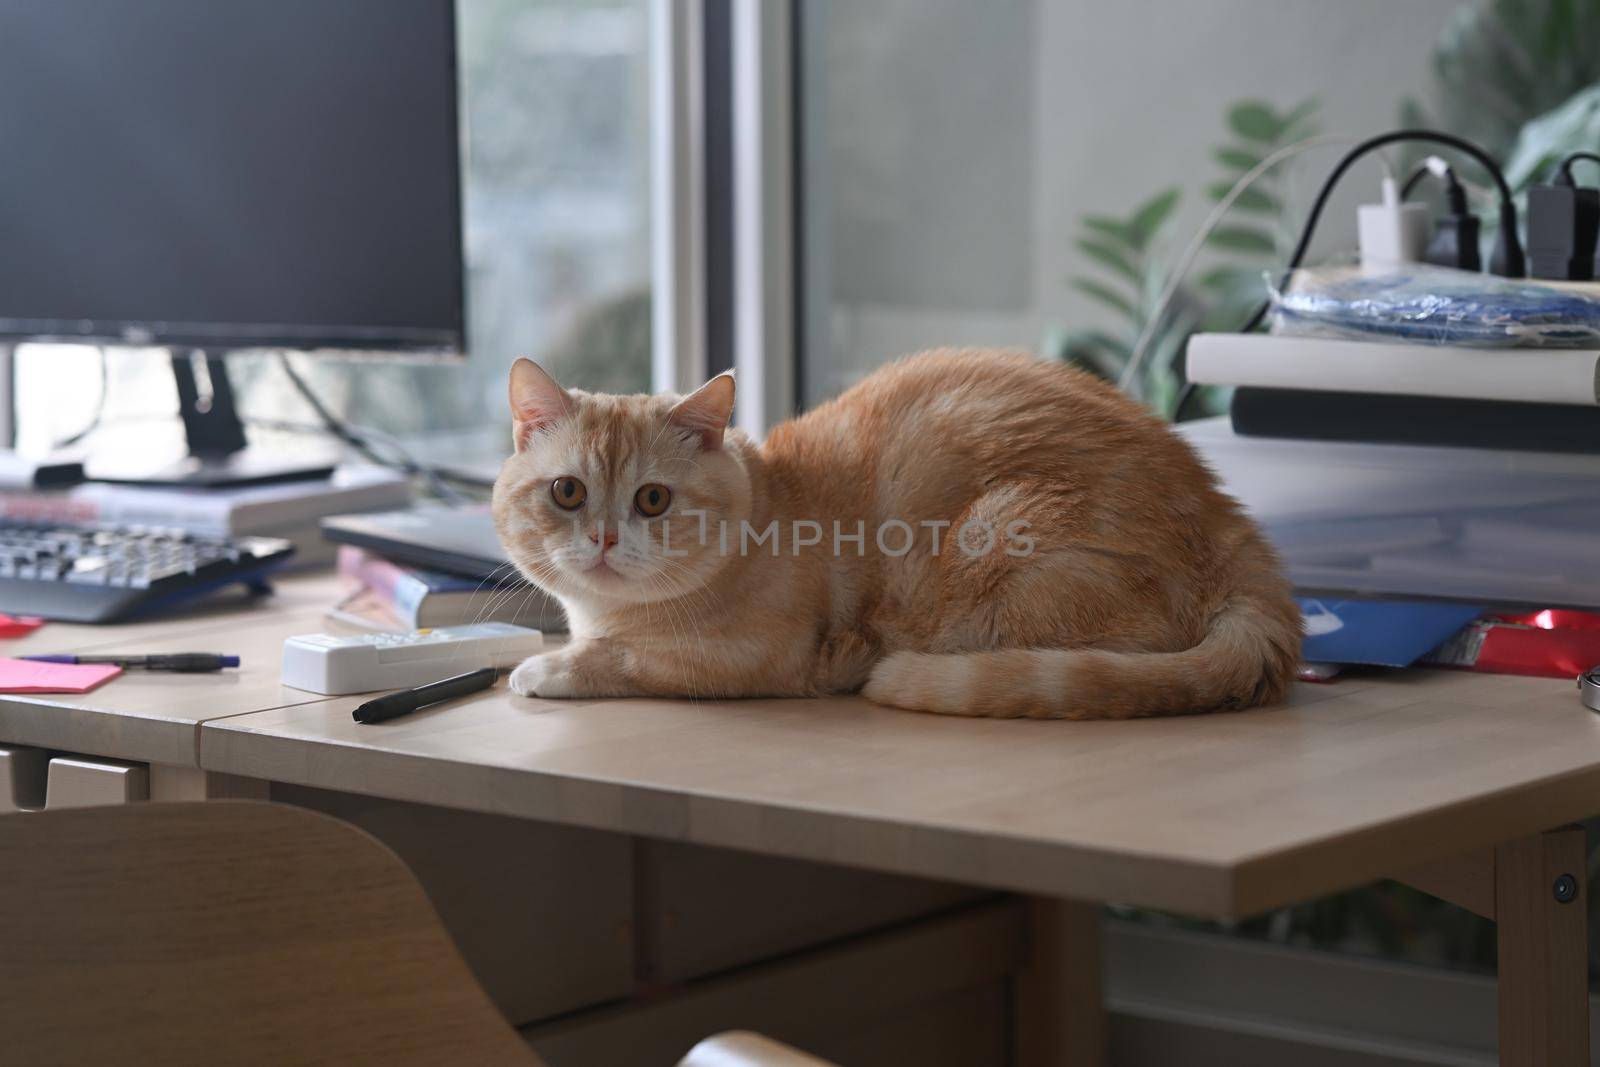 Adorable cat sitting on wooden table near computer pc and stationery. Home office desk by prathanchorruangsak